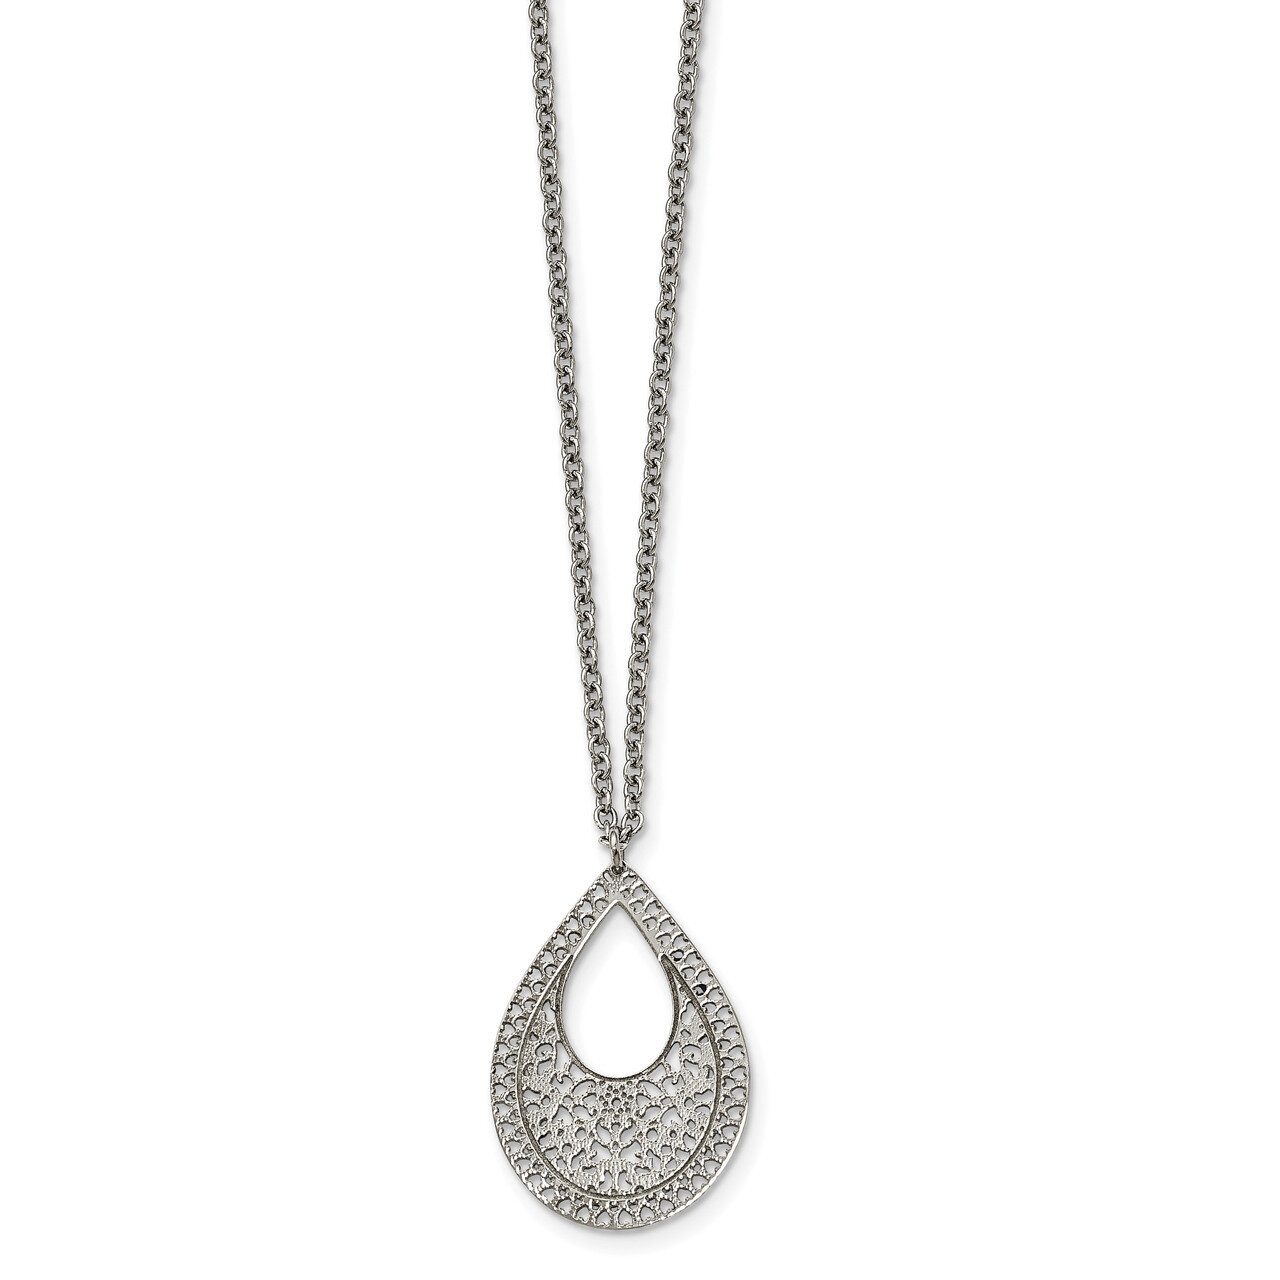 Textured Cut-out Design Necklace Stainless Steel Polished SRN2205-17.75